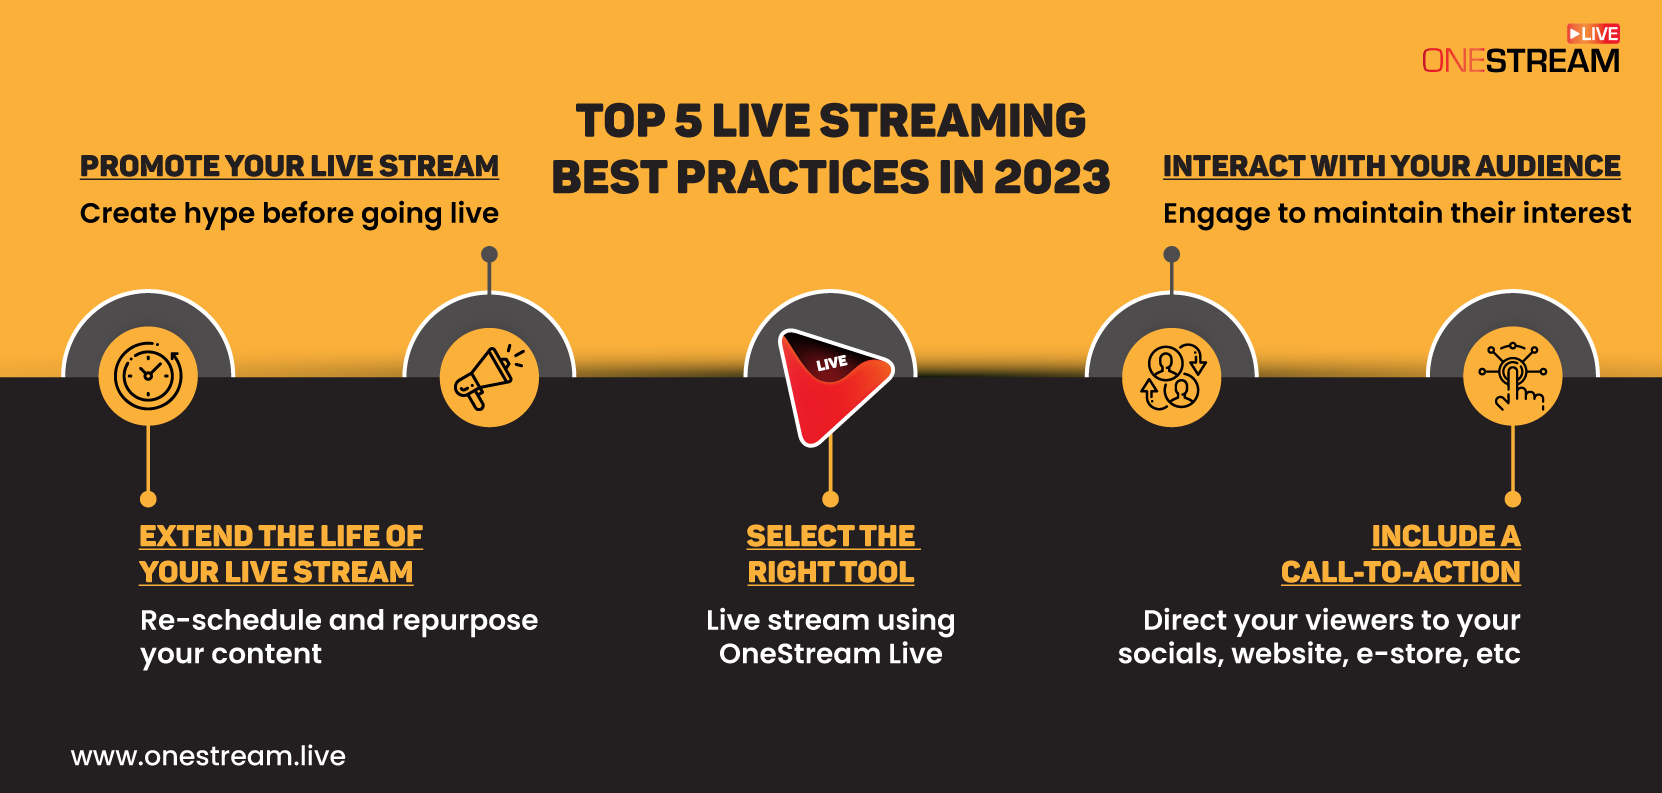 Live streaming best practices